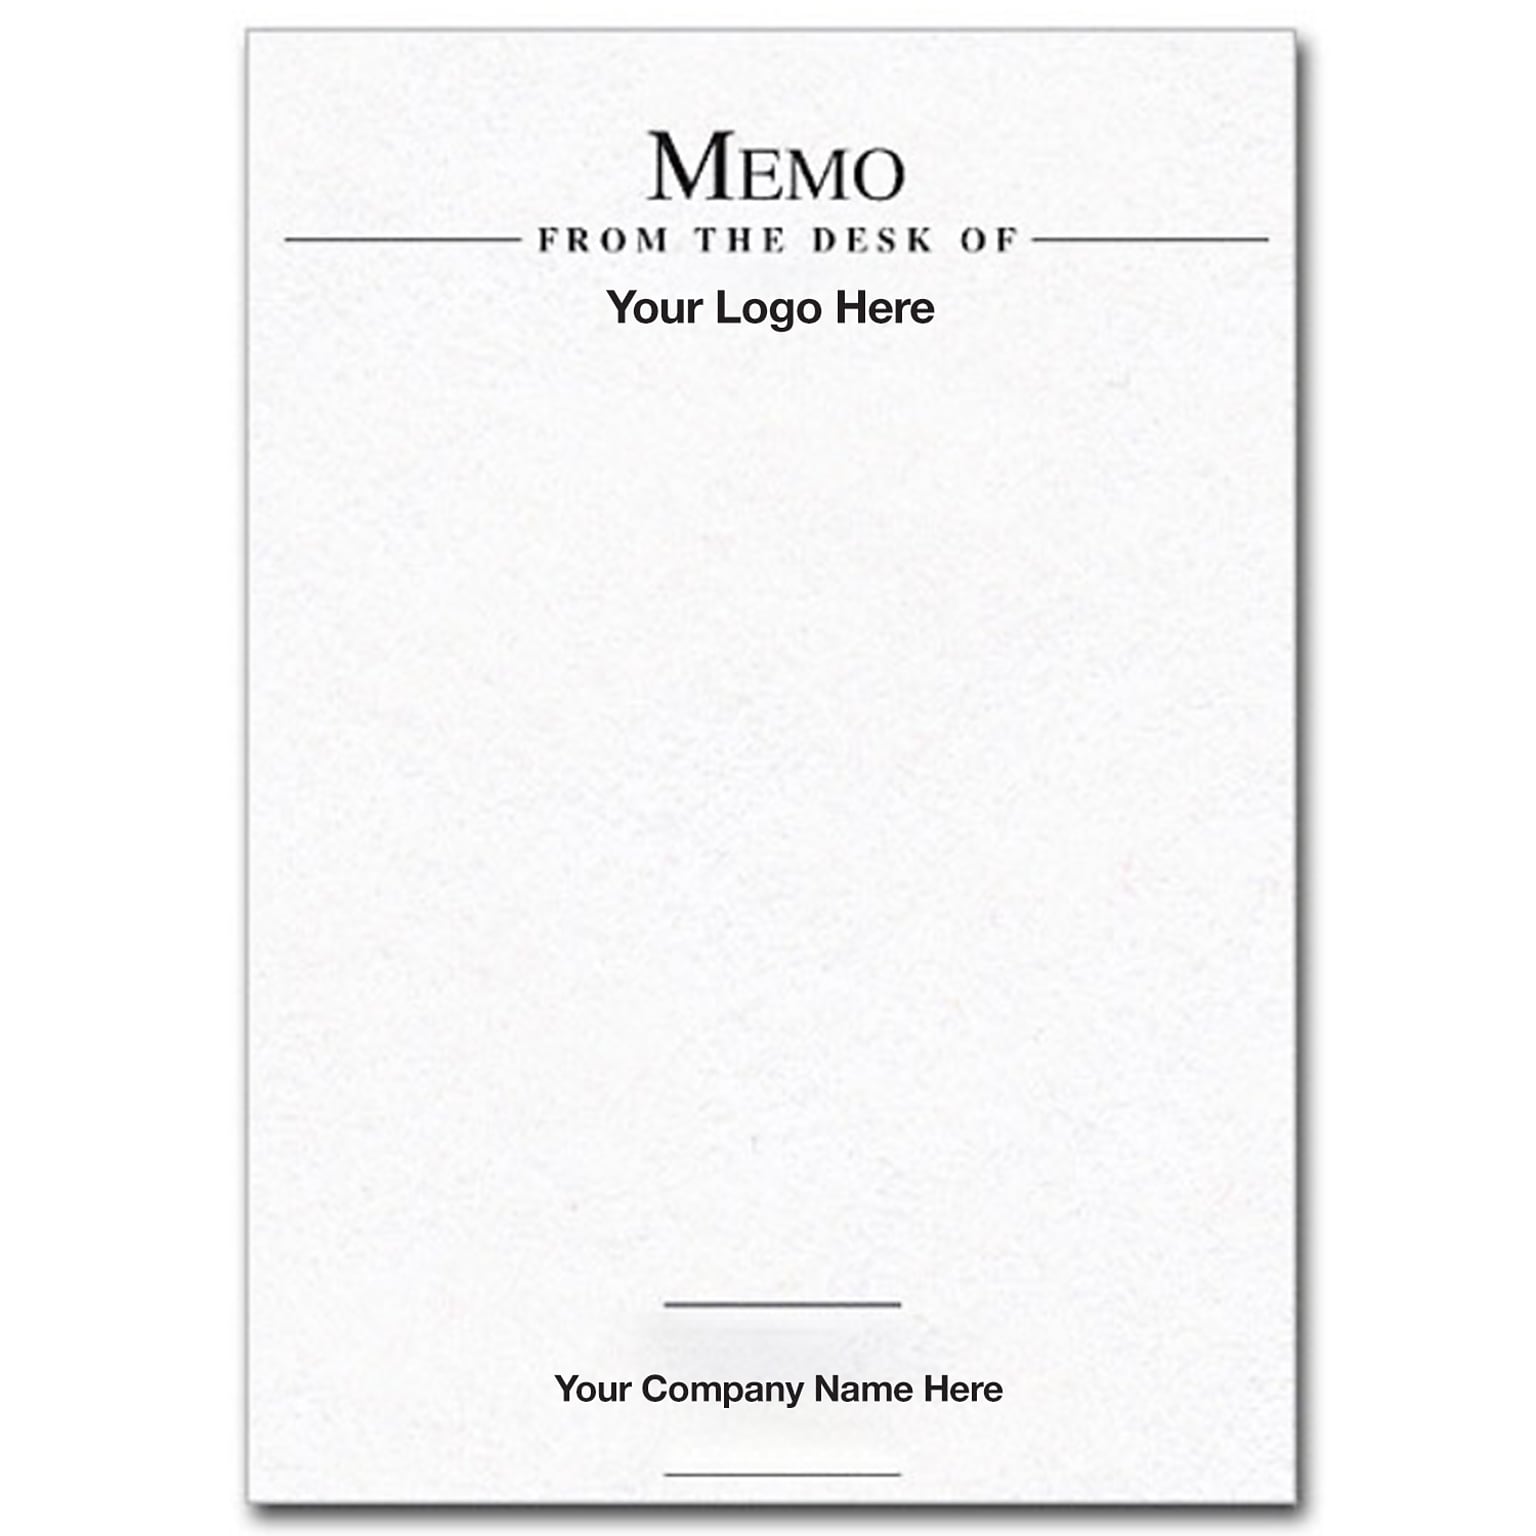 Custom Memo Pads, White Smooth 24# Text Stock, 11 x 17, 2 Standard Inks, Flat Ink, 100 Sheets per Pad